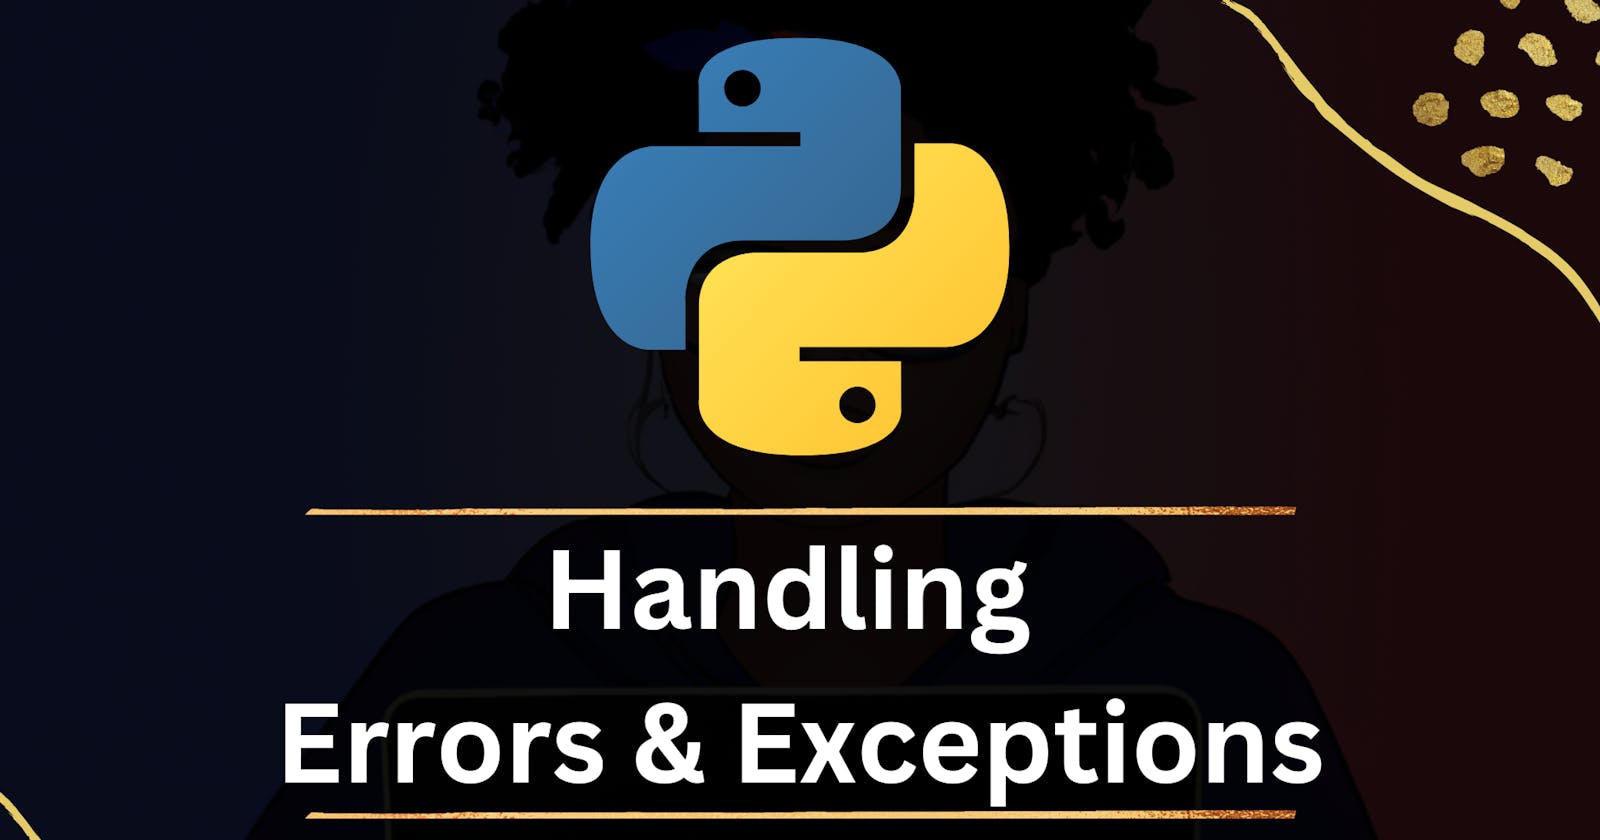 Handling errors and exceptions in Python